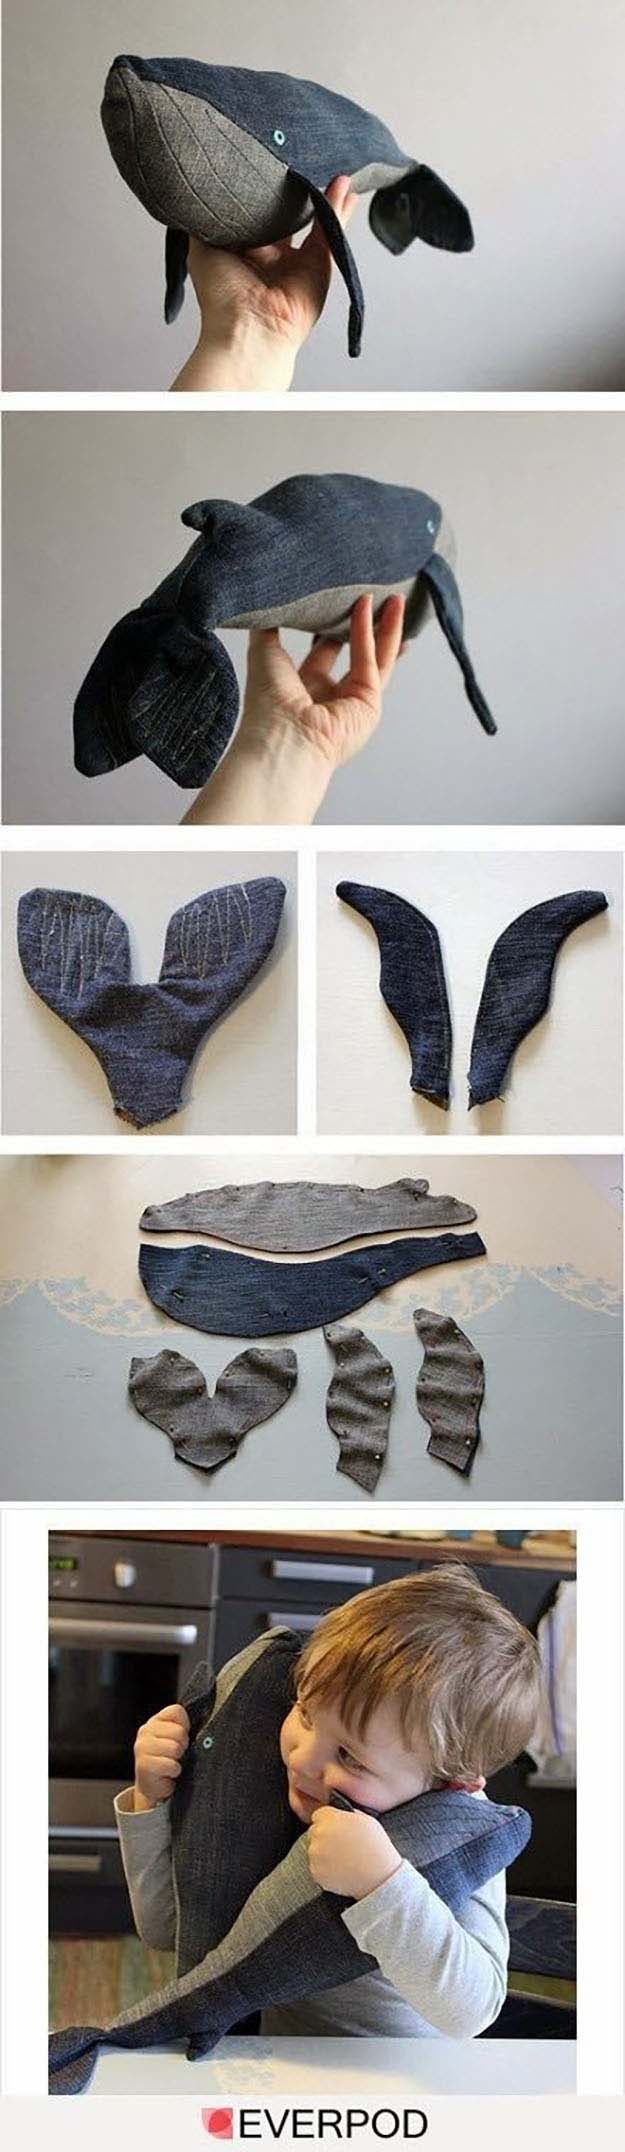 Easy Sewing Idea for Kids | Crafts for Kids from Old Denim | DIY Whale Plush Toy | DIY Projects & Crafts by DIY JOY #sewingideas #denim #upcycling